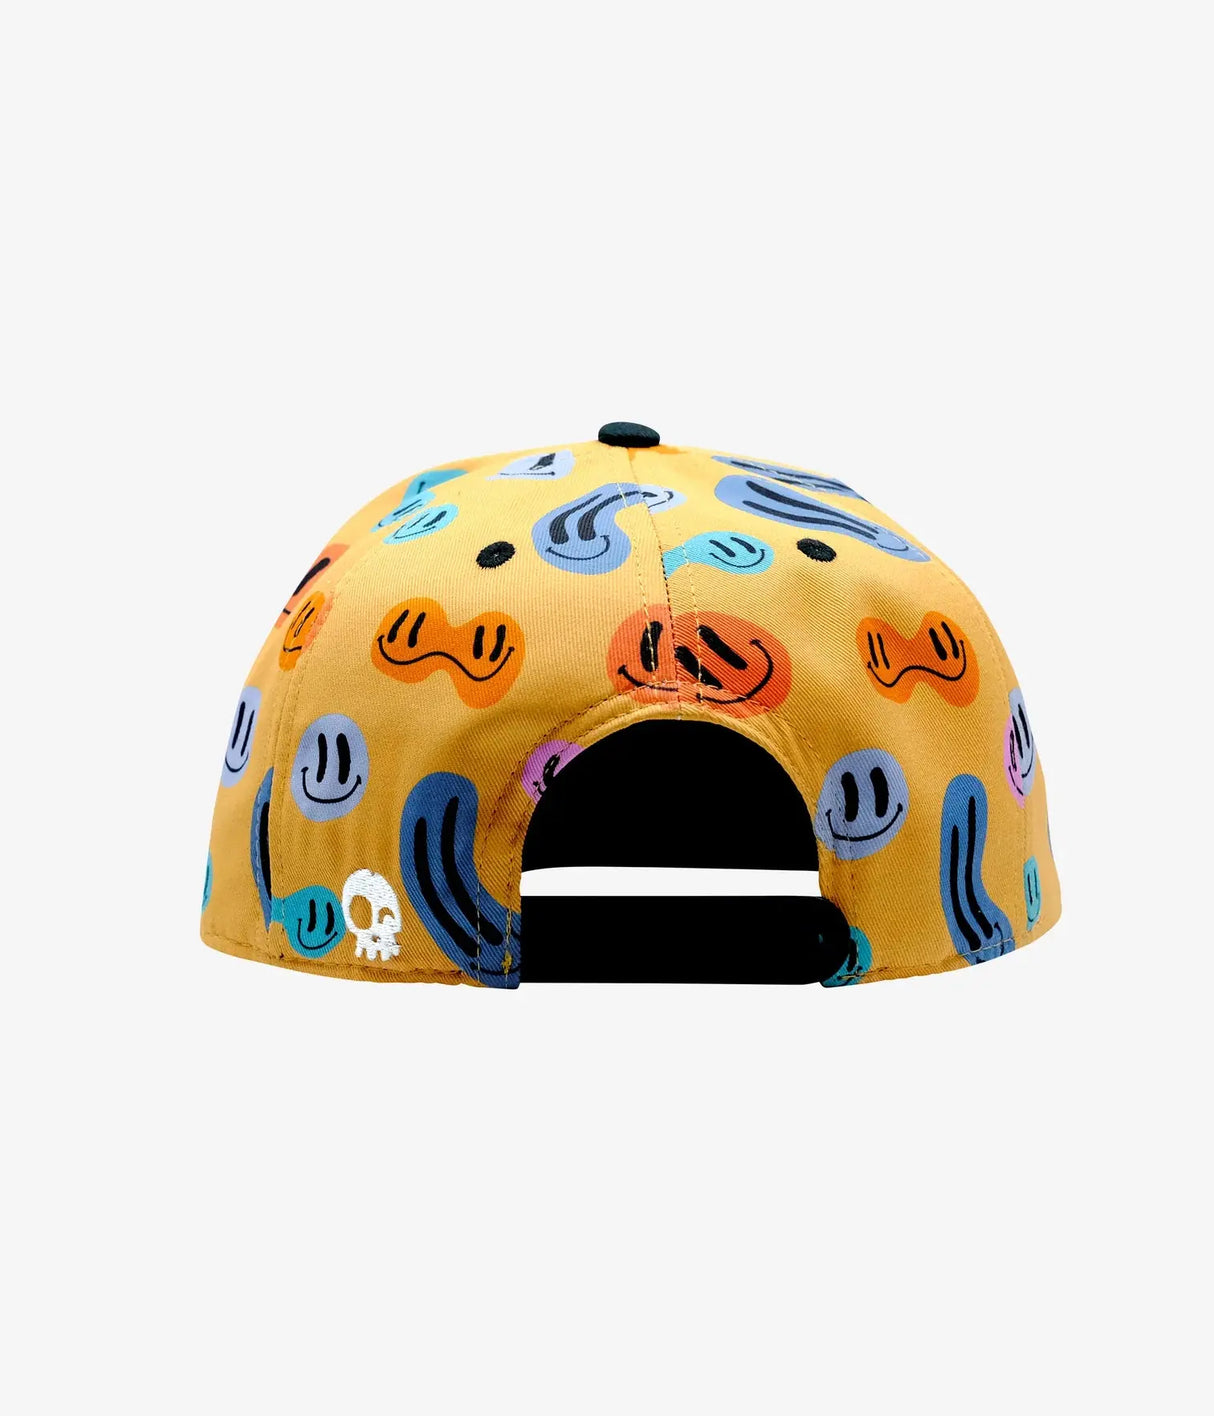 Peppy Snapback Hat - Yellow | Headster - Headster